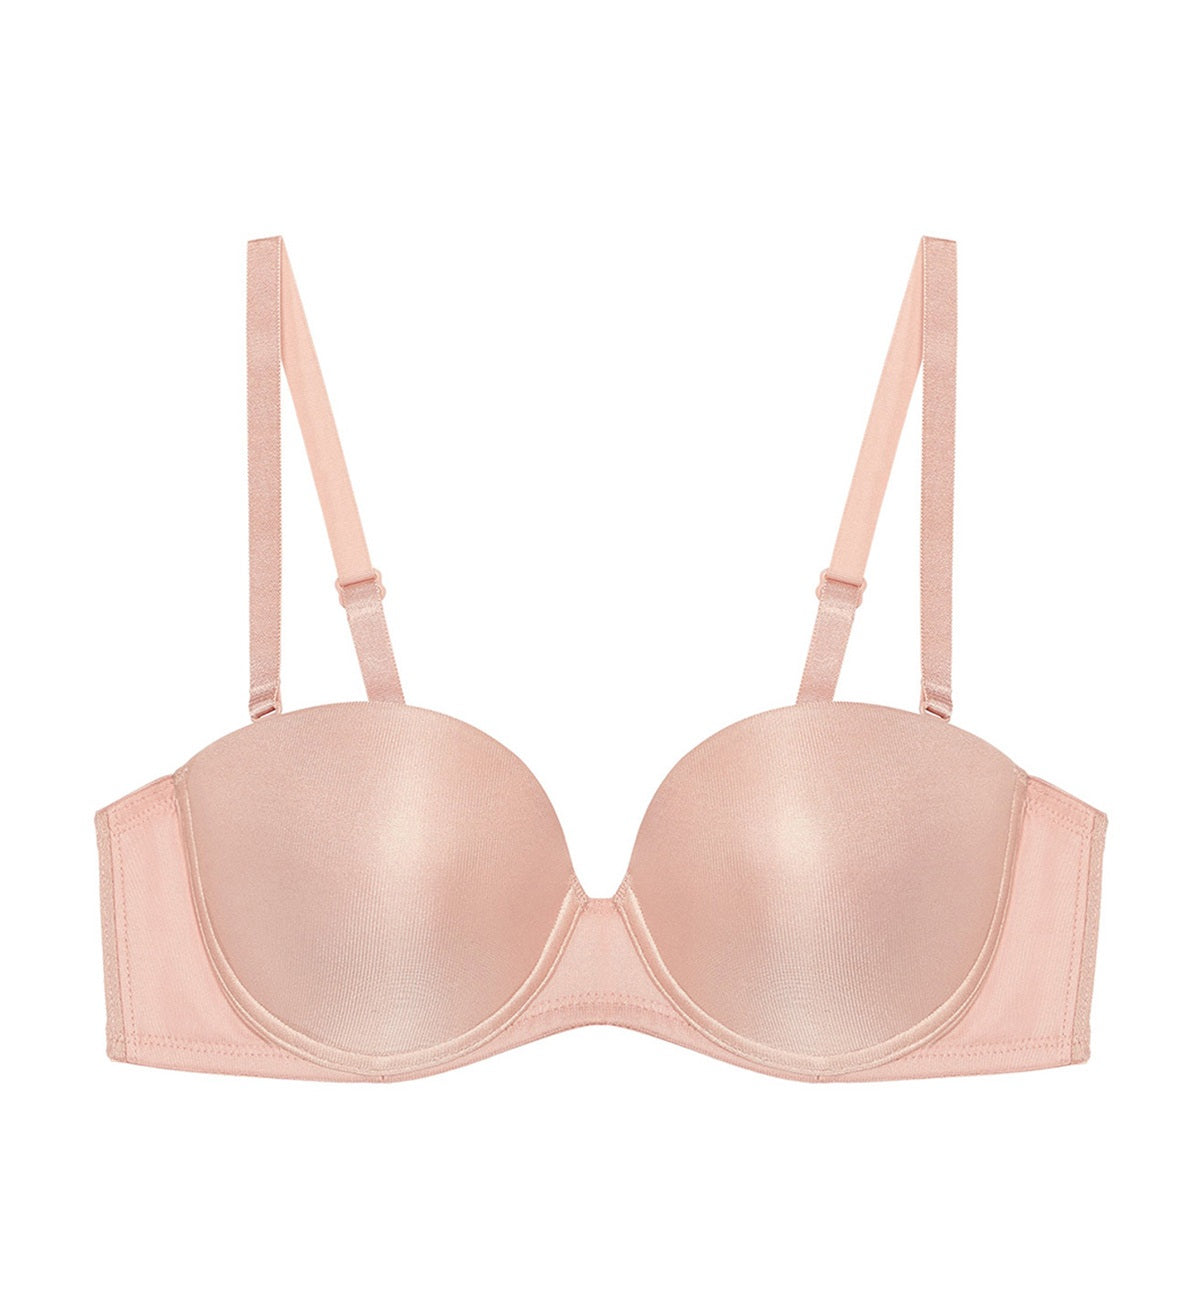 Maximizer Wired Push Up Detachable Bra in Soft Mauve